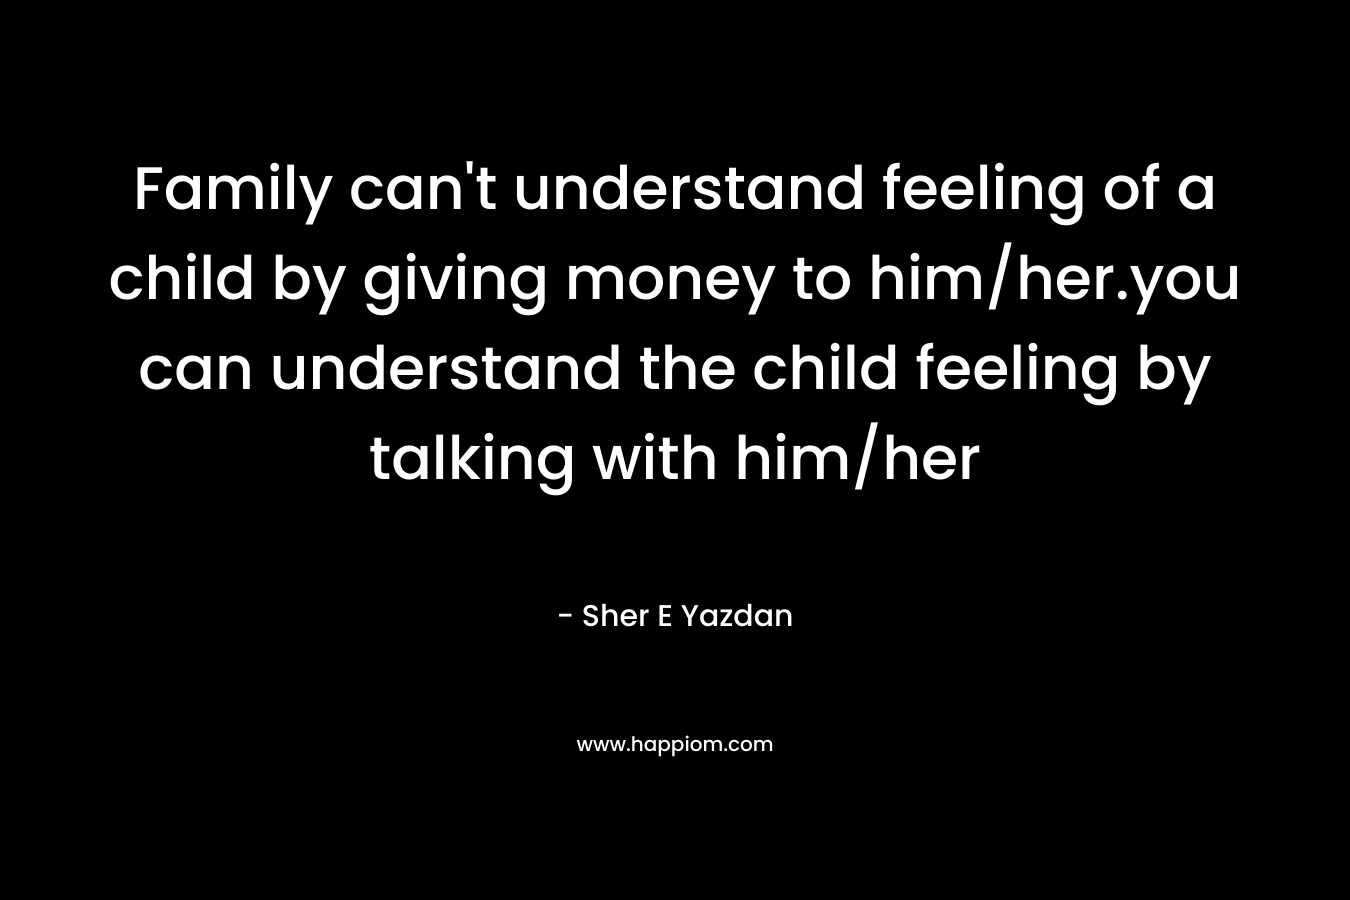 Family can't understand feeling of a child by giving money to him/her.you can understand the child feeling by talking with him/her